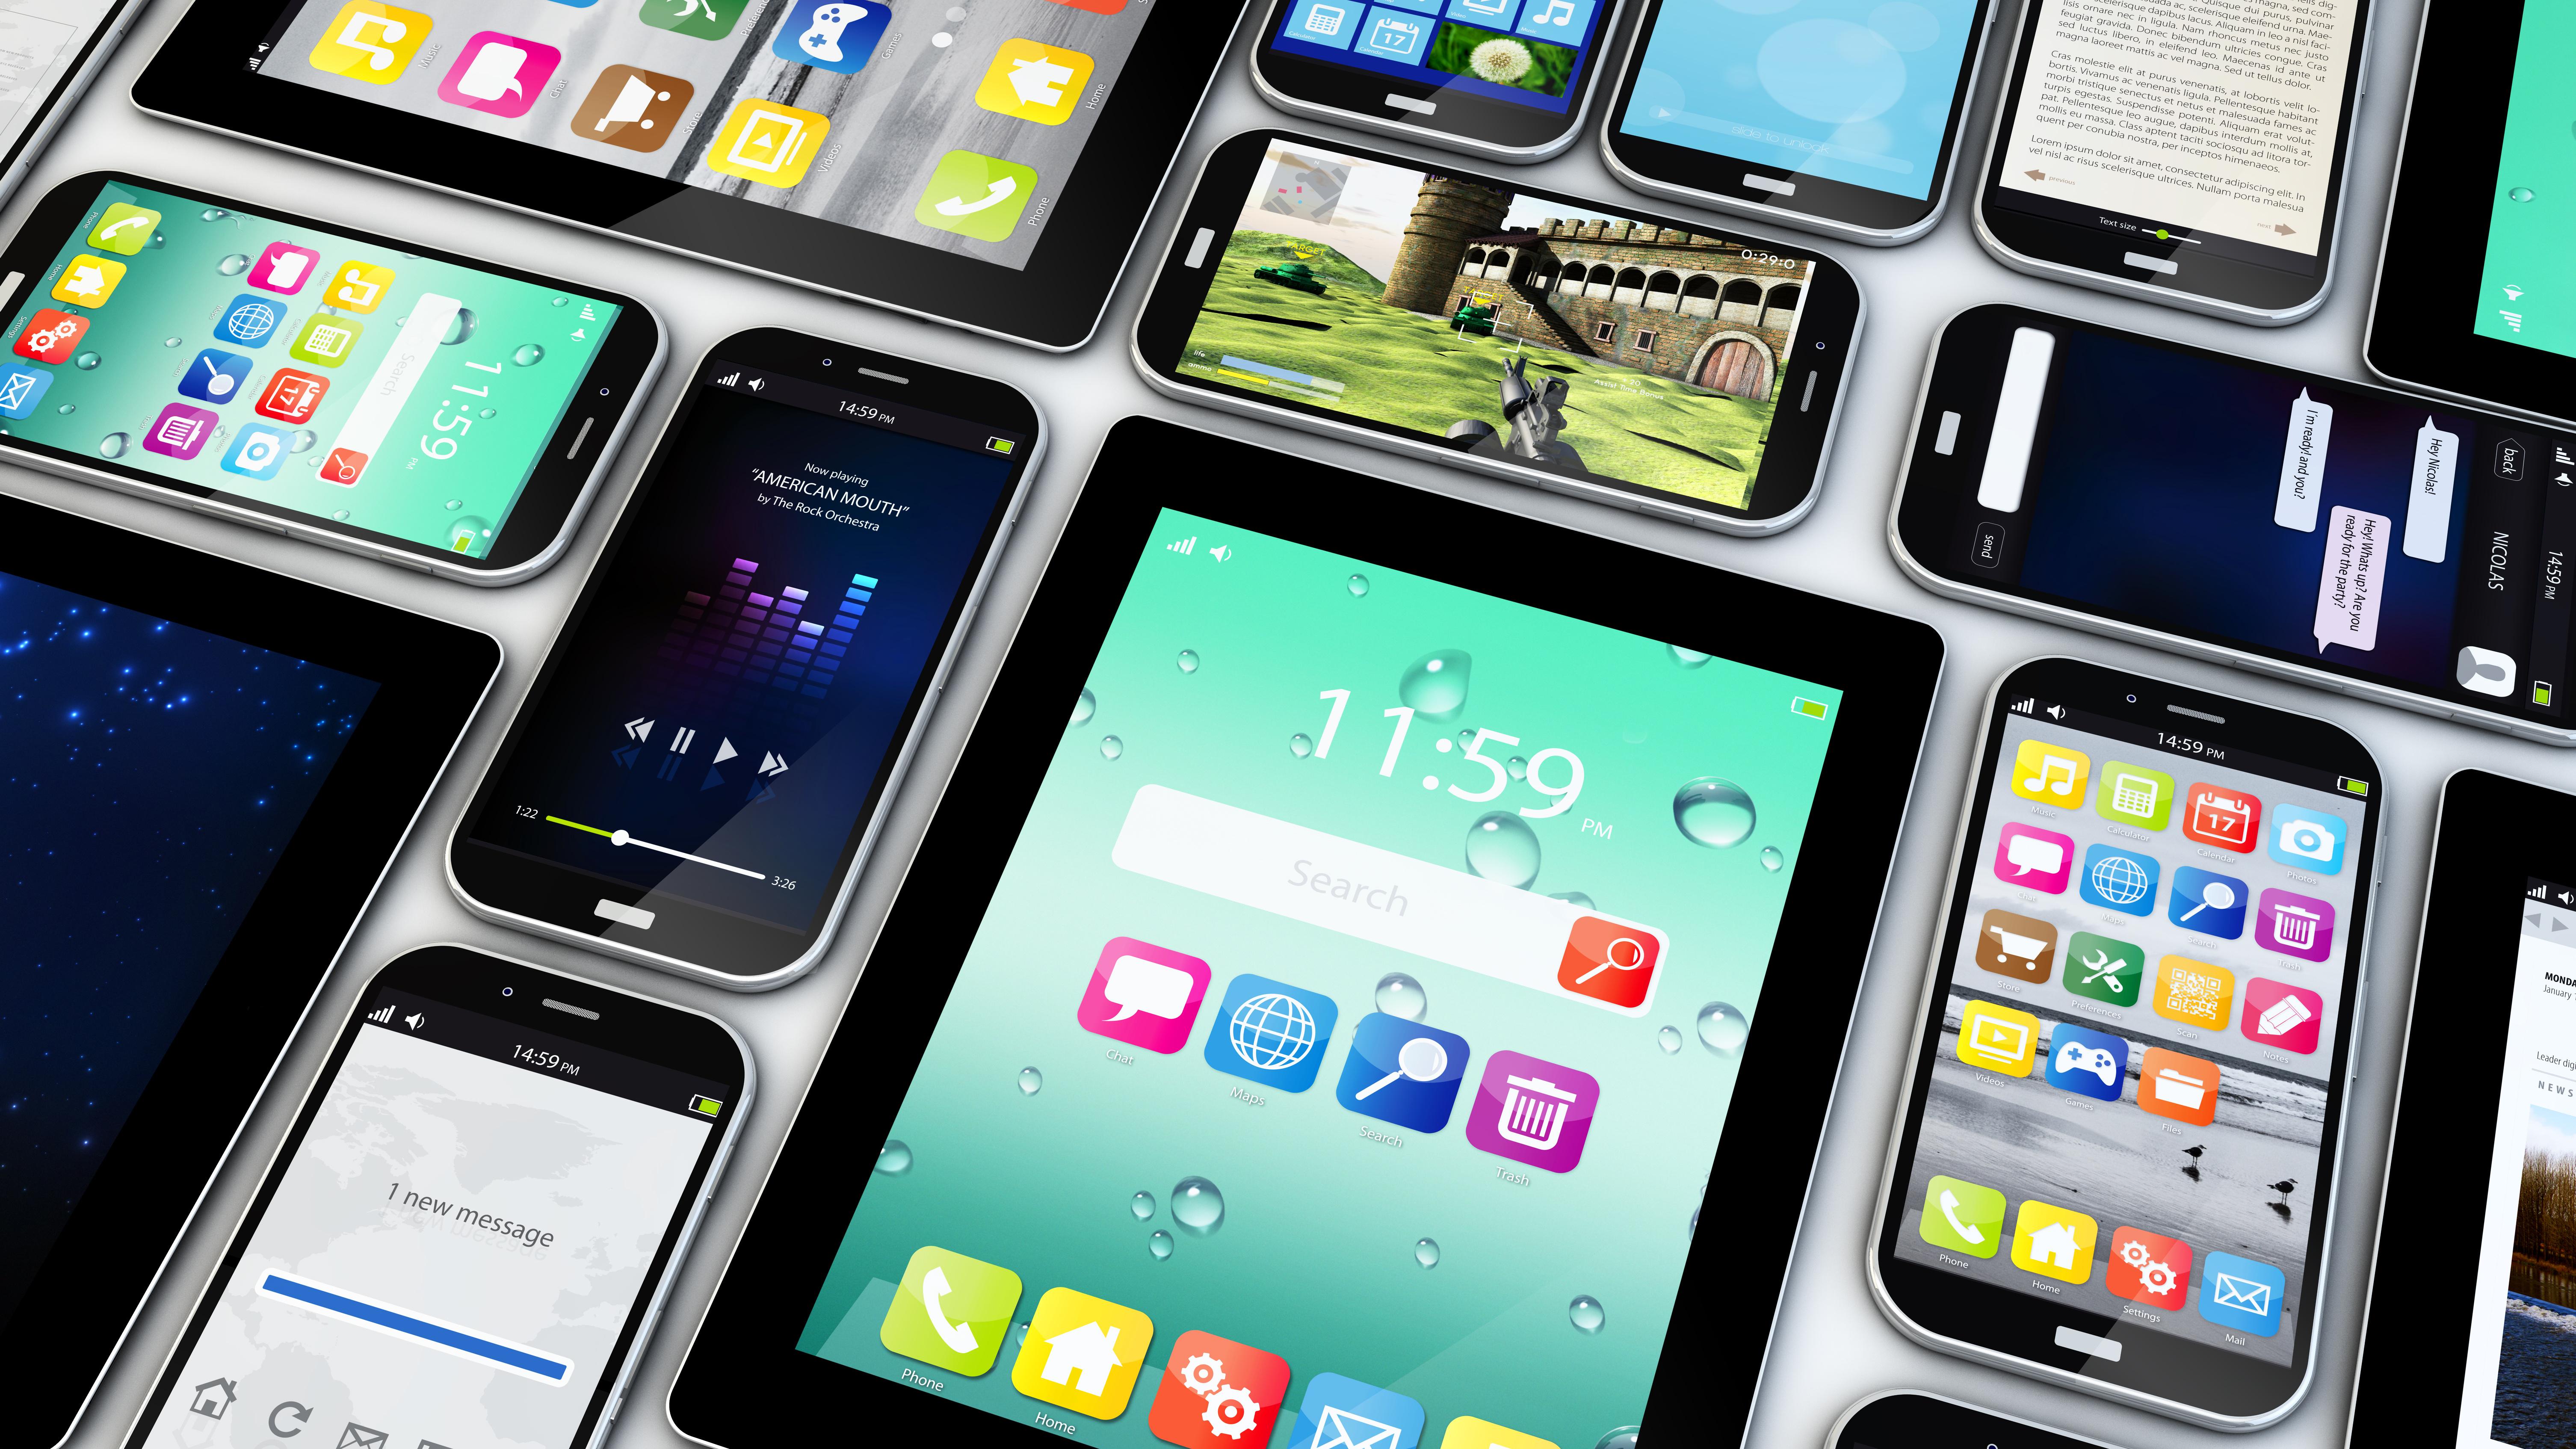 Group of mobile devices with apps and interfaces (credit: MclittleStock - stock.adobe.com)